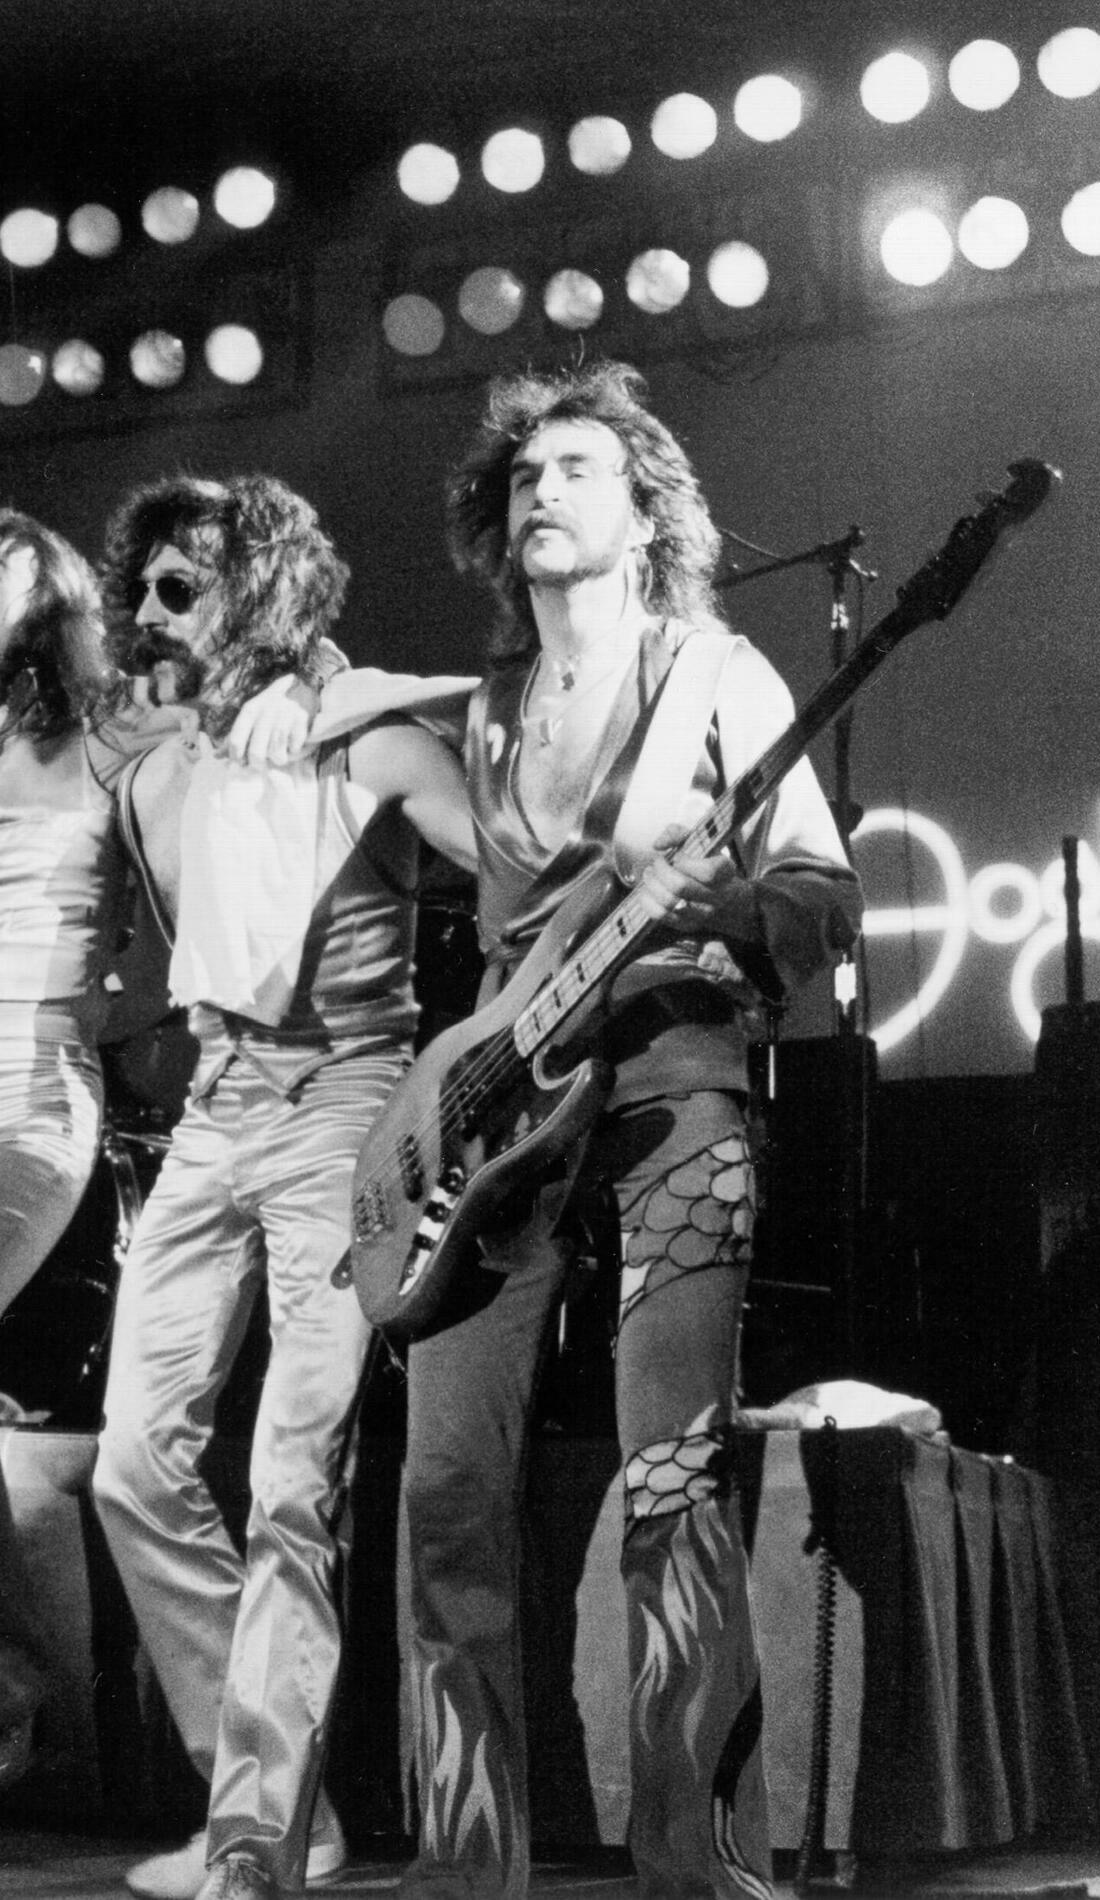 A Foghat live event